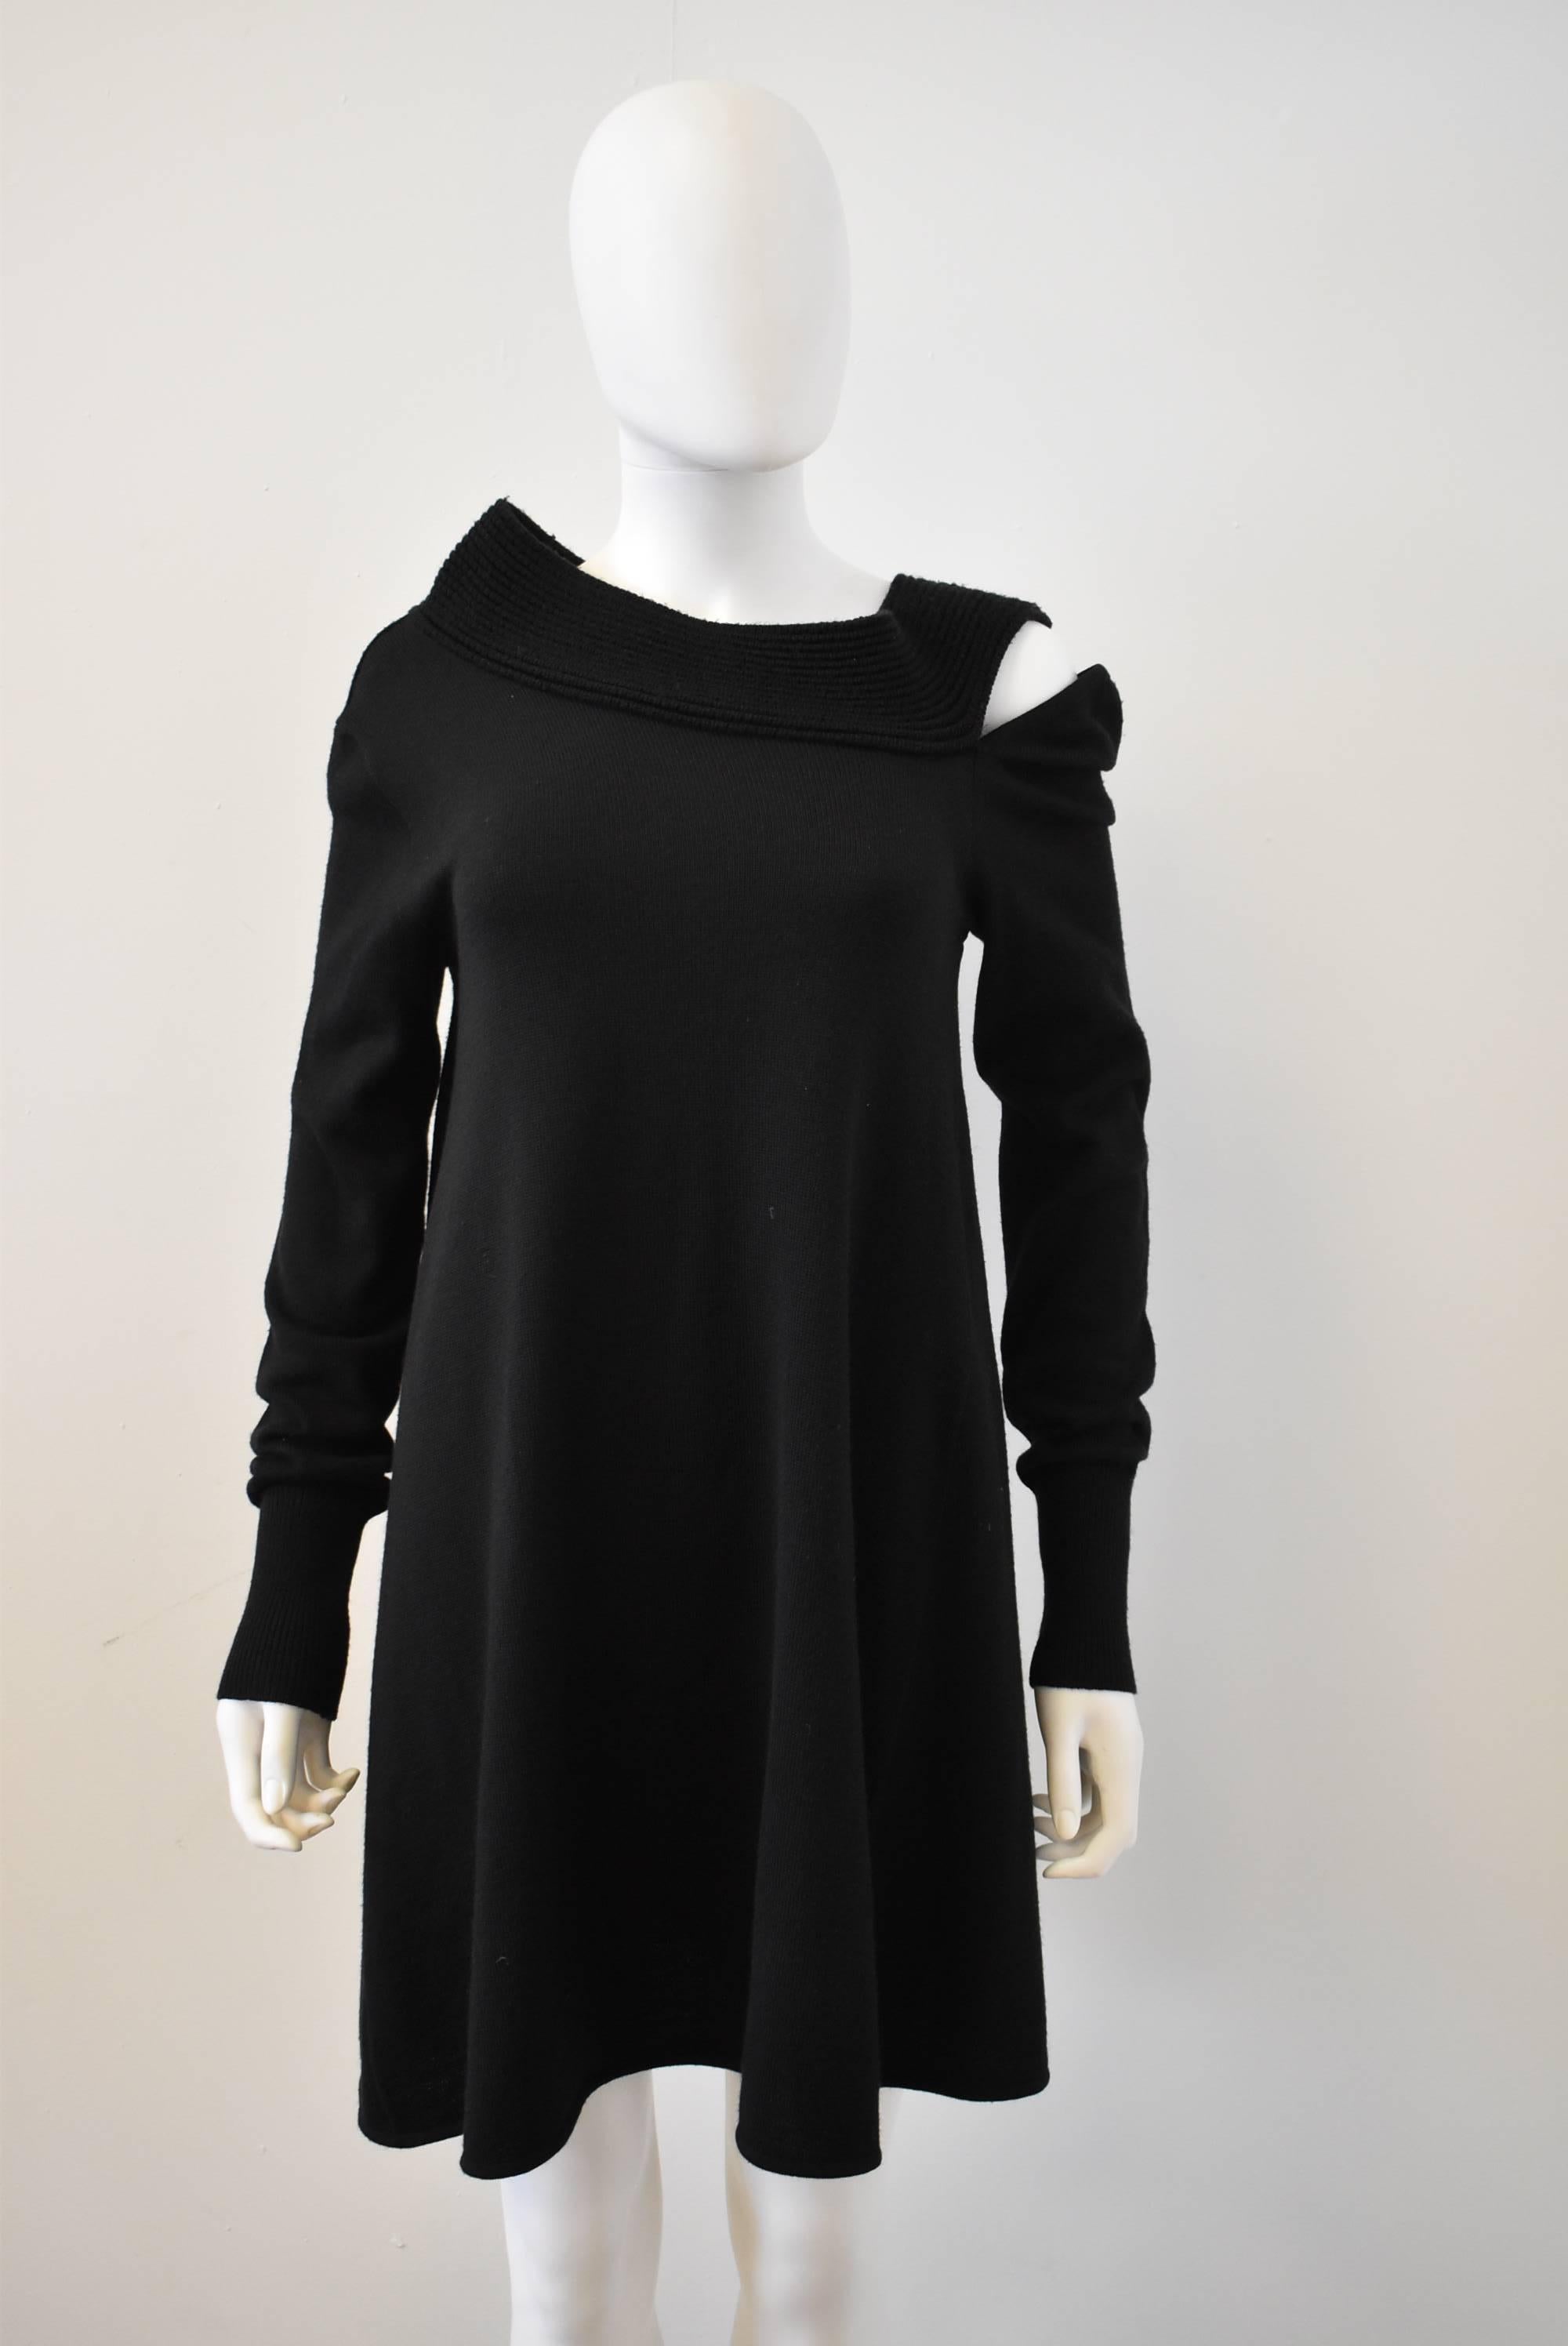 A beautiful black knit dress from Balenciaga. The asymmetric neckline has a ribbed texture which can be worn as a funnel neck or pulled down to reveal the shoulders. The left arm has a cold shoulder opening for a twist on a simple knit dress. 